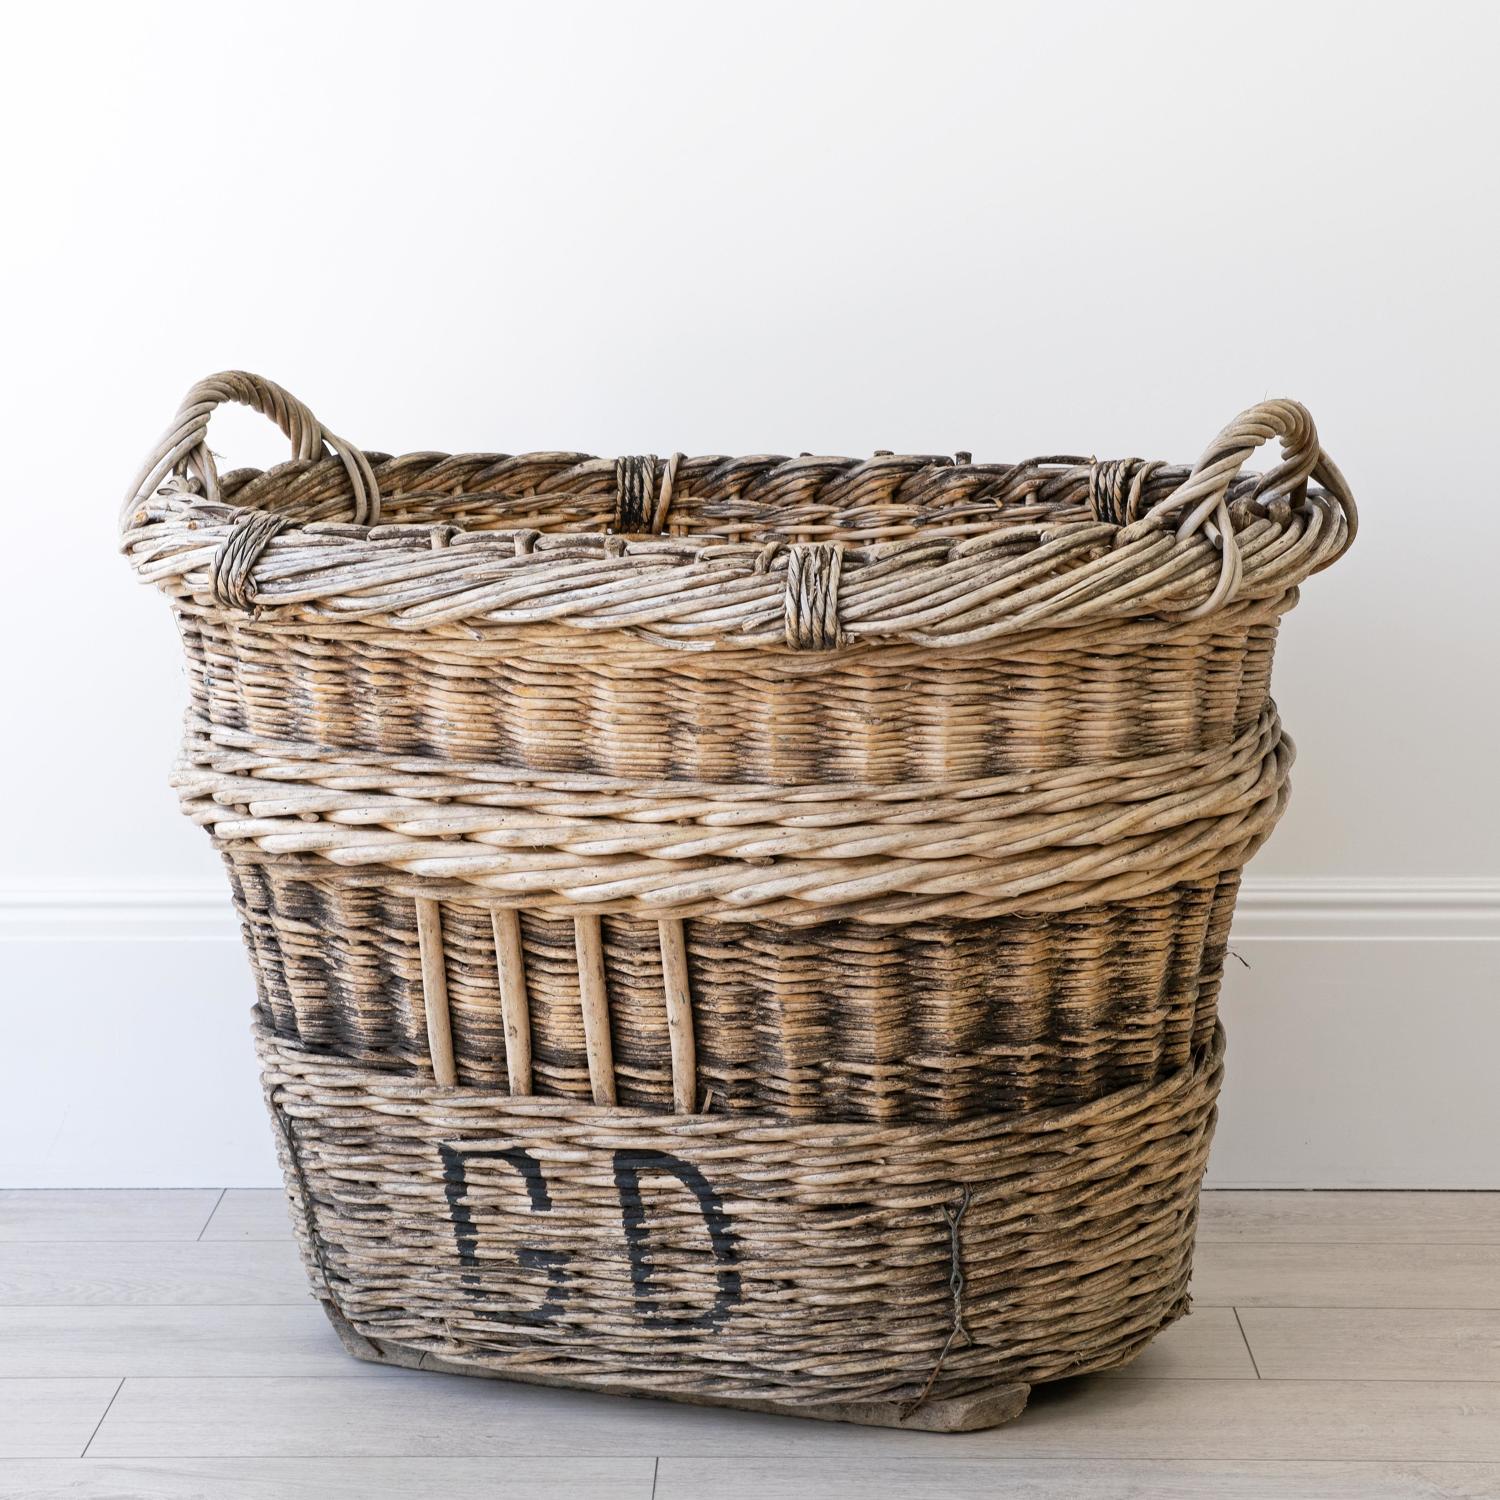 VERY LARGE CHAMPAGNE BASKET